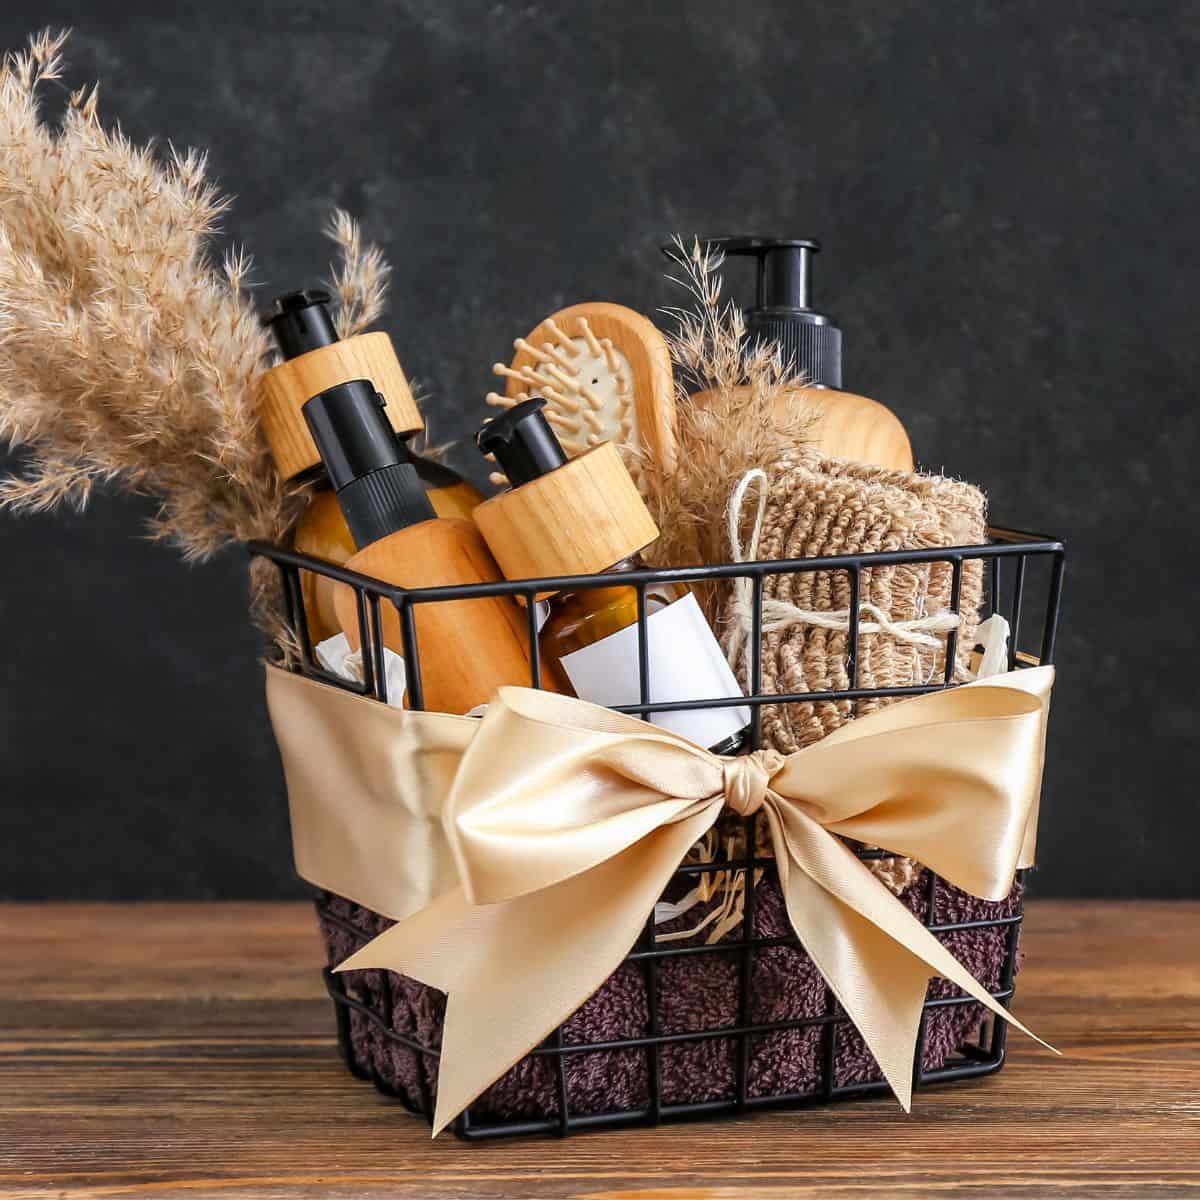 Vegan Gift Baskets for Every Occasion